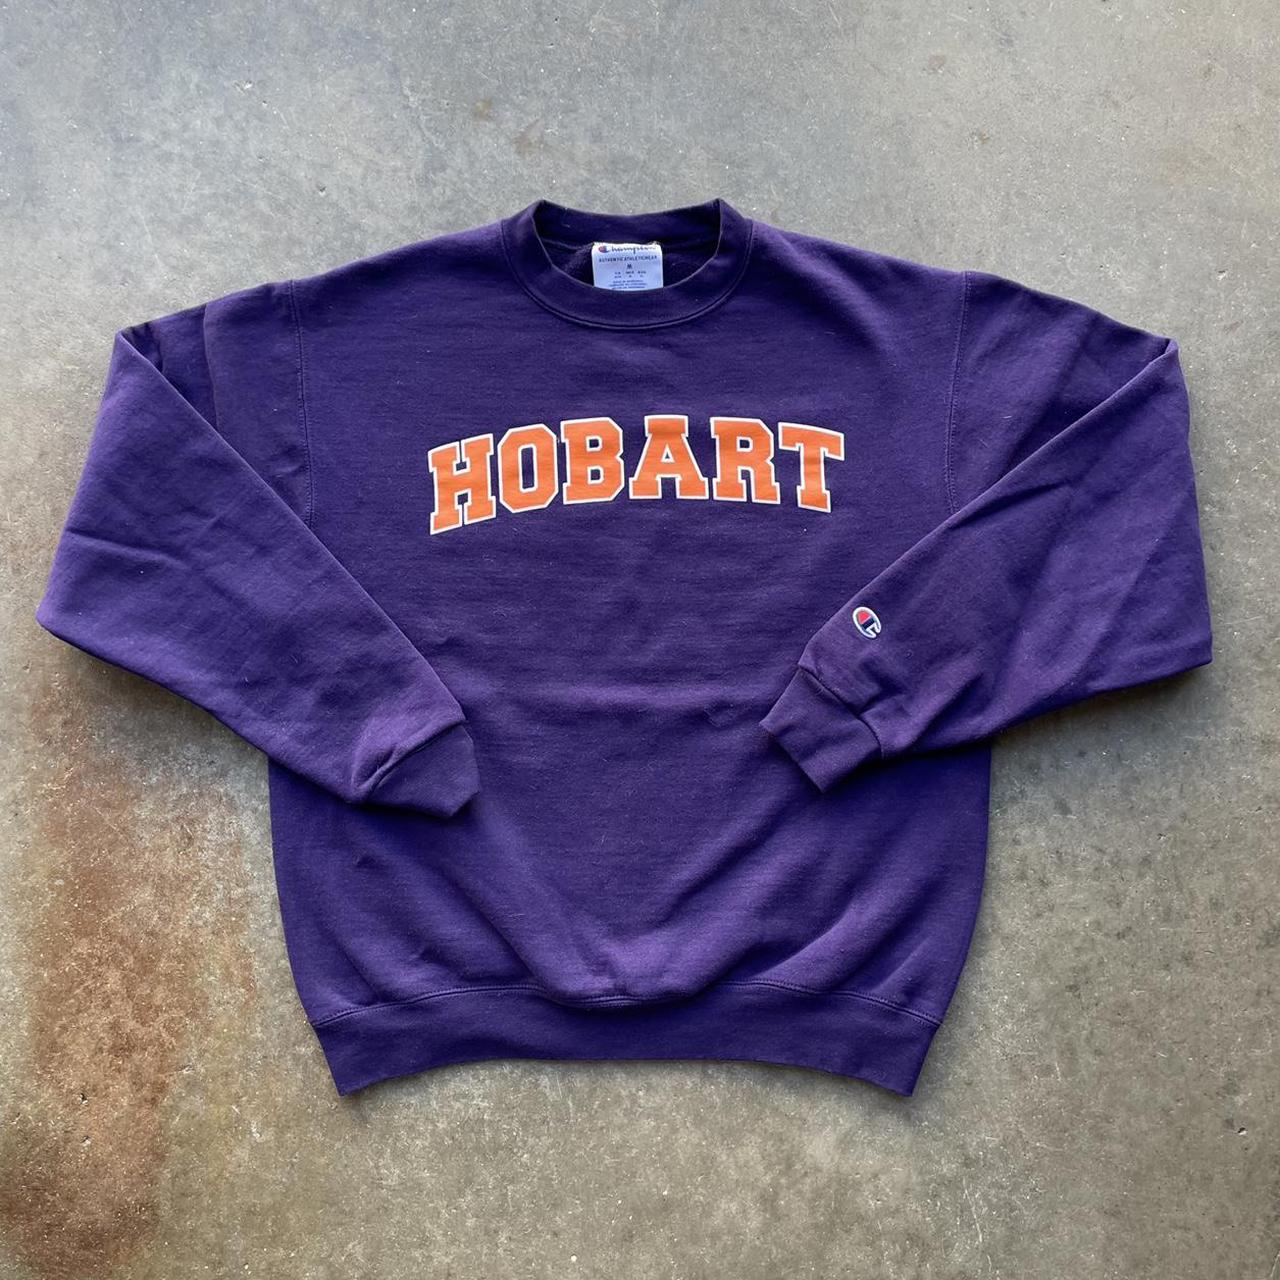 Product Image 2 - Champion Hobart Williams smith college